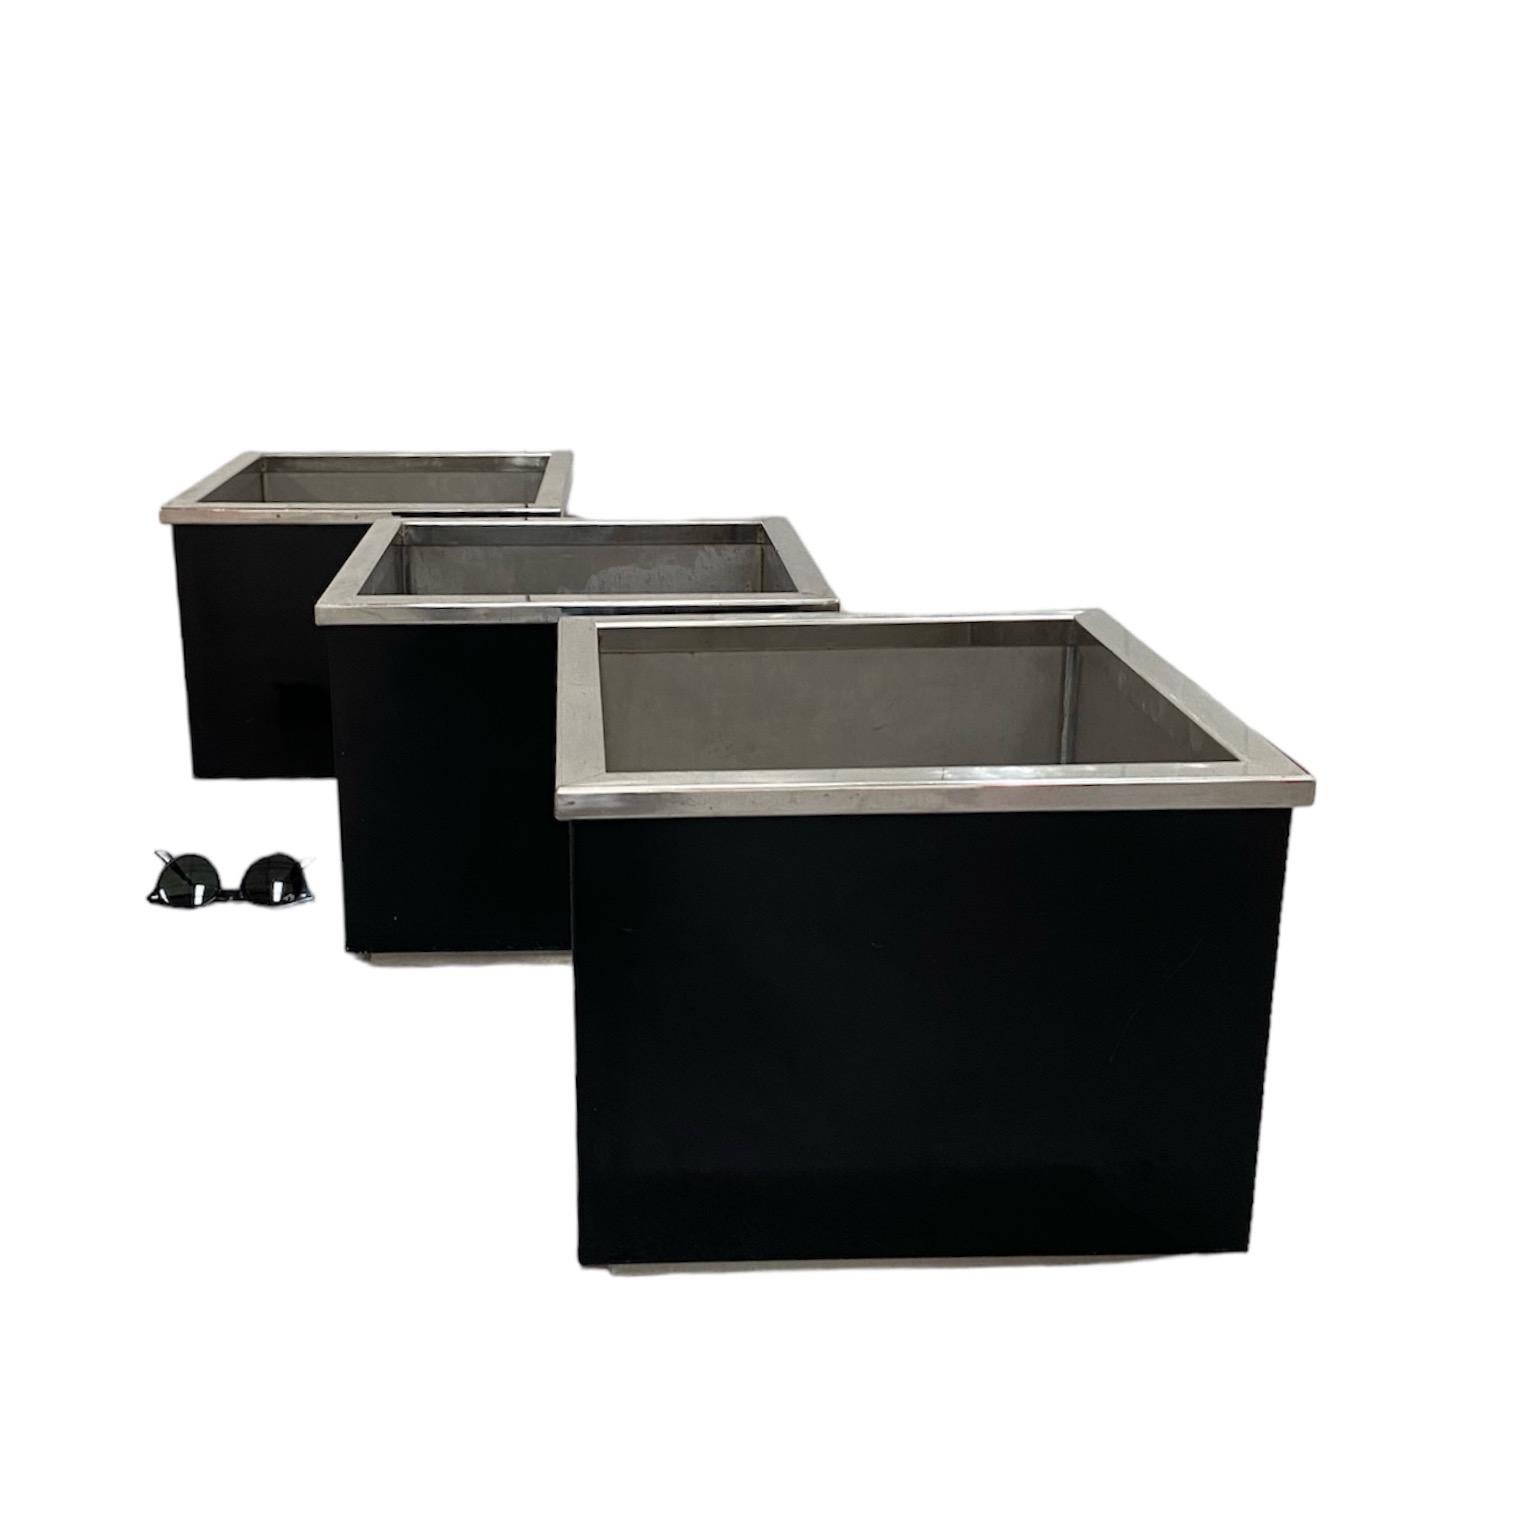 Metal 1960s-70s black enamel and chrome metal cubic planters, manner of Willy Rizzo For Sale